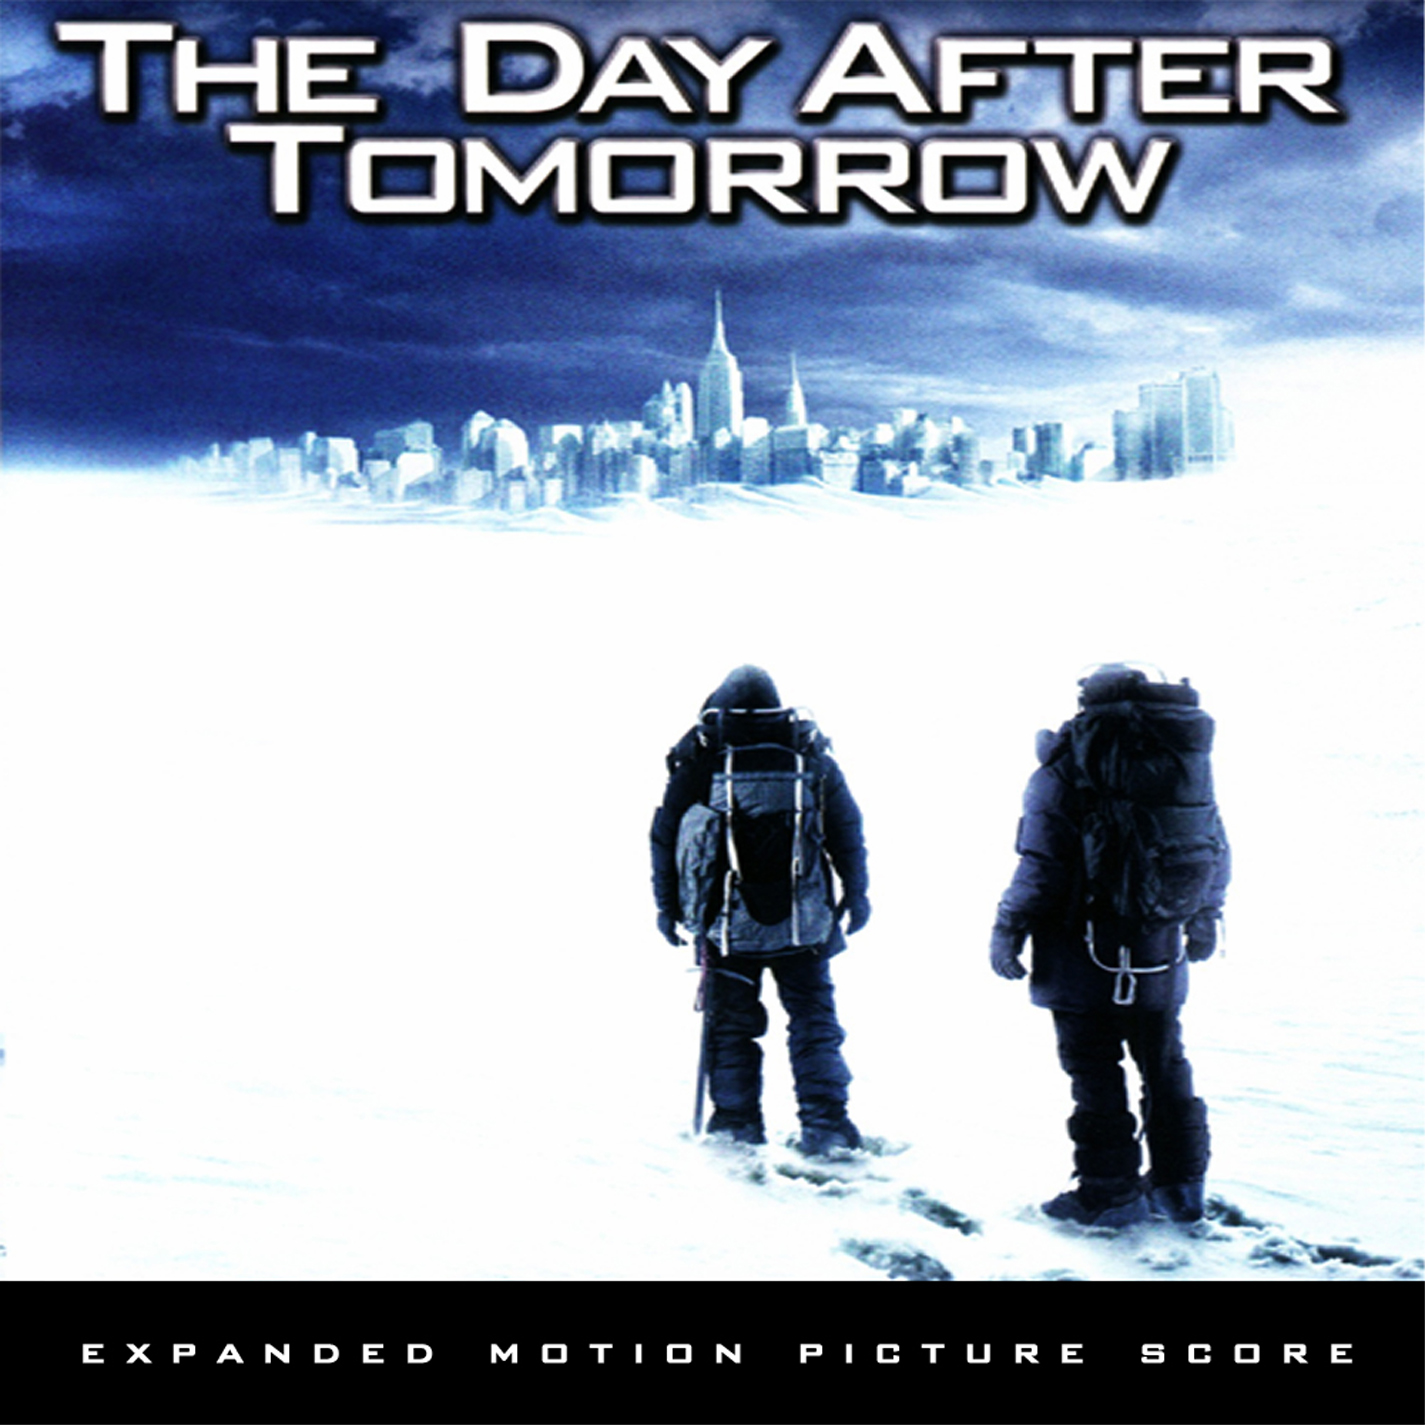 The Day after tomorrow. Days after. The Day after tomorrow игра. The Day after tomorrow Band. The day before tomorrow